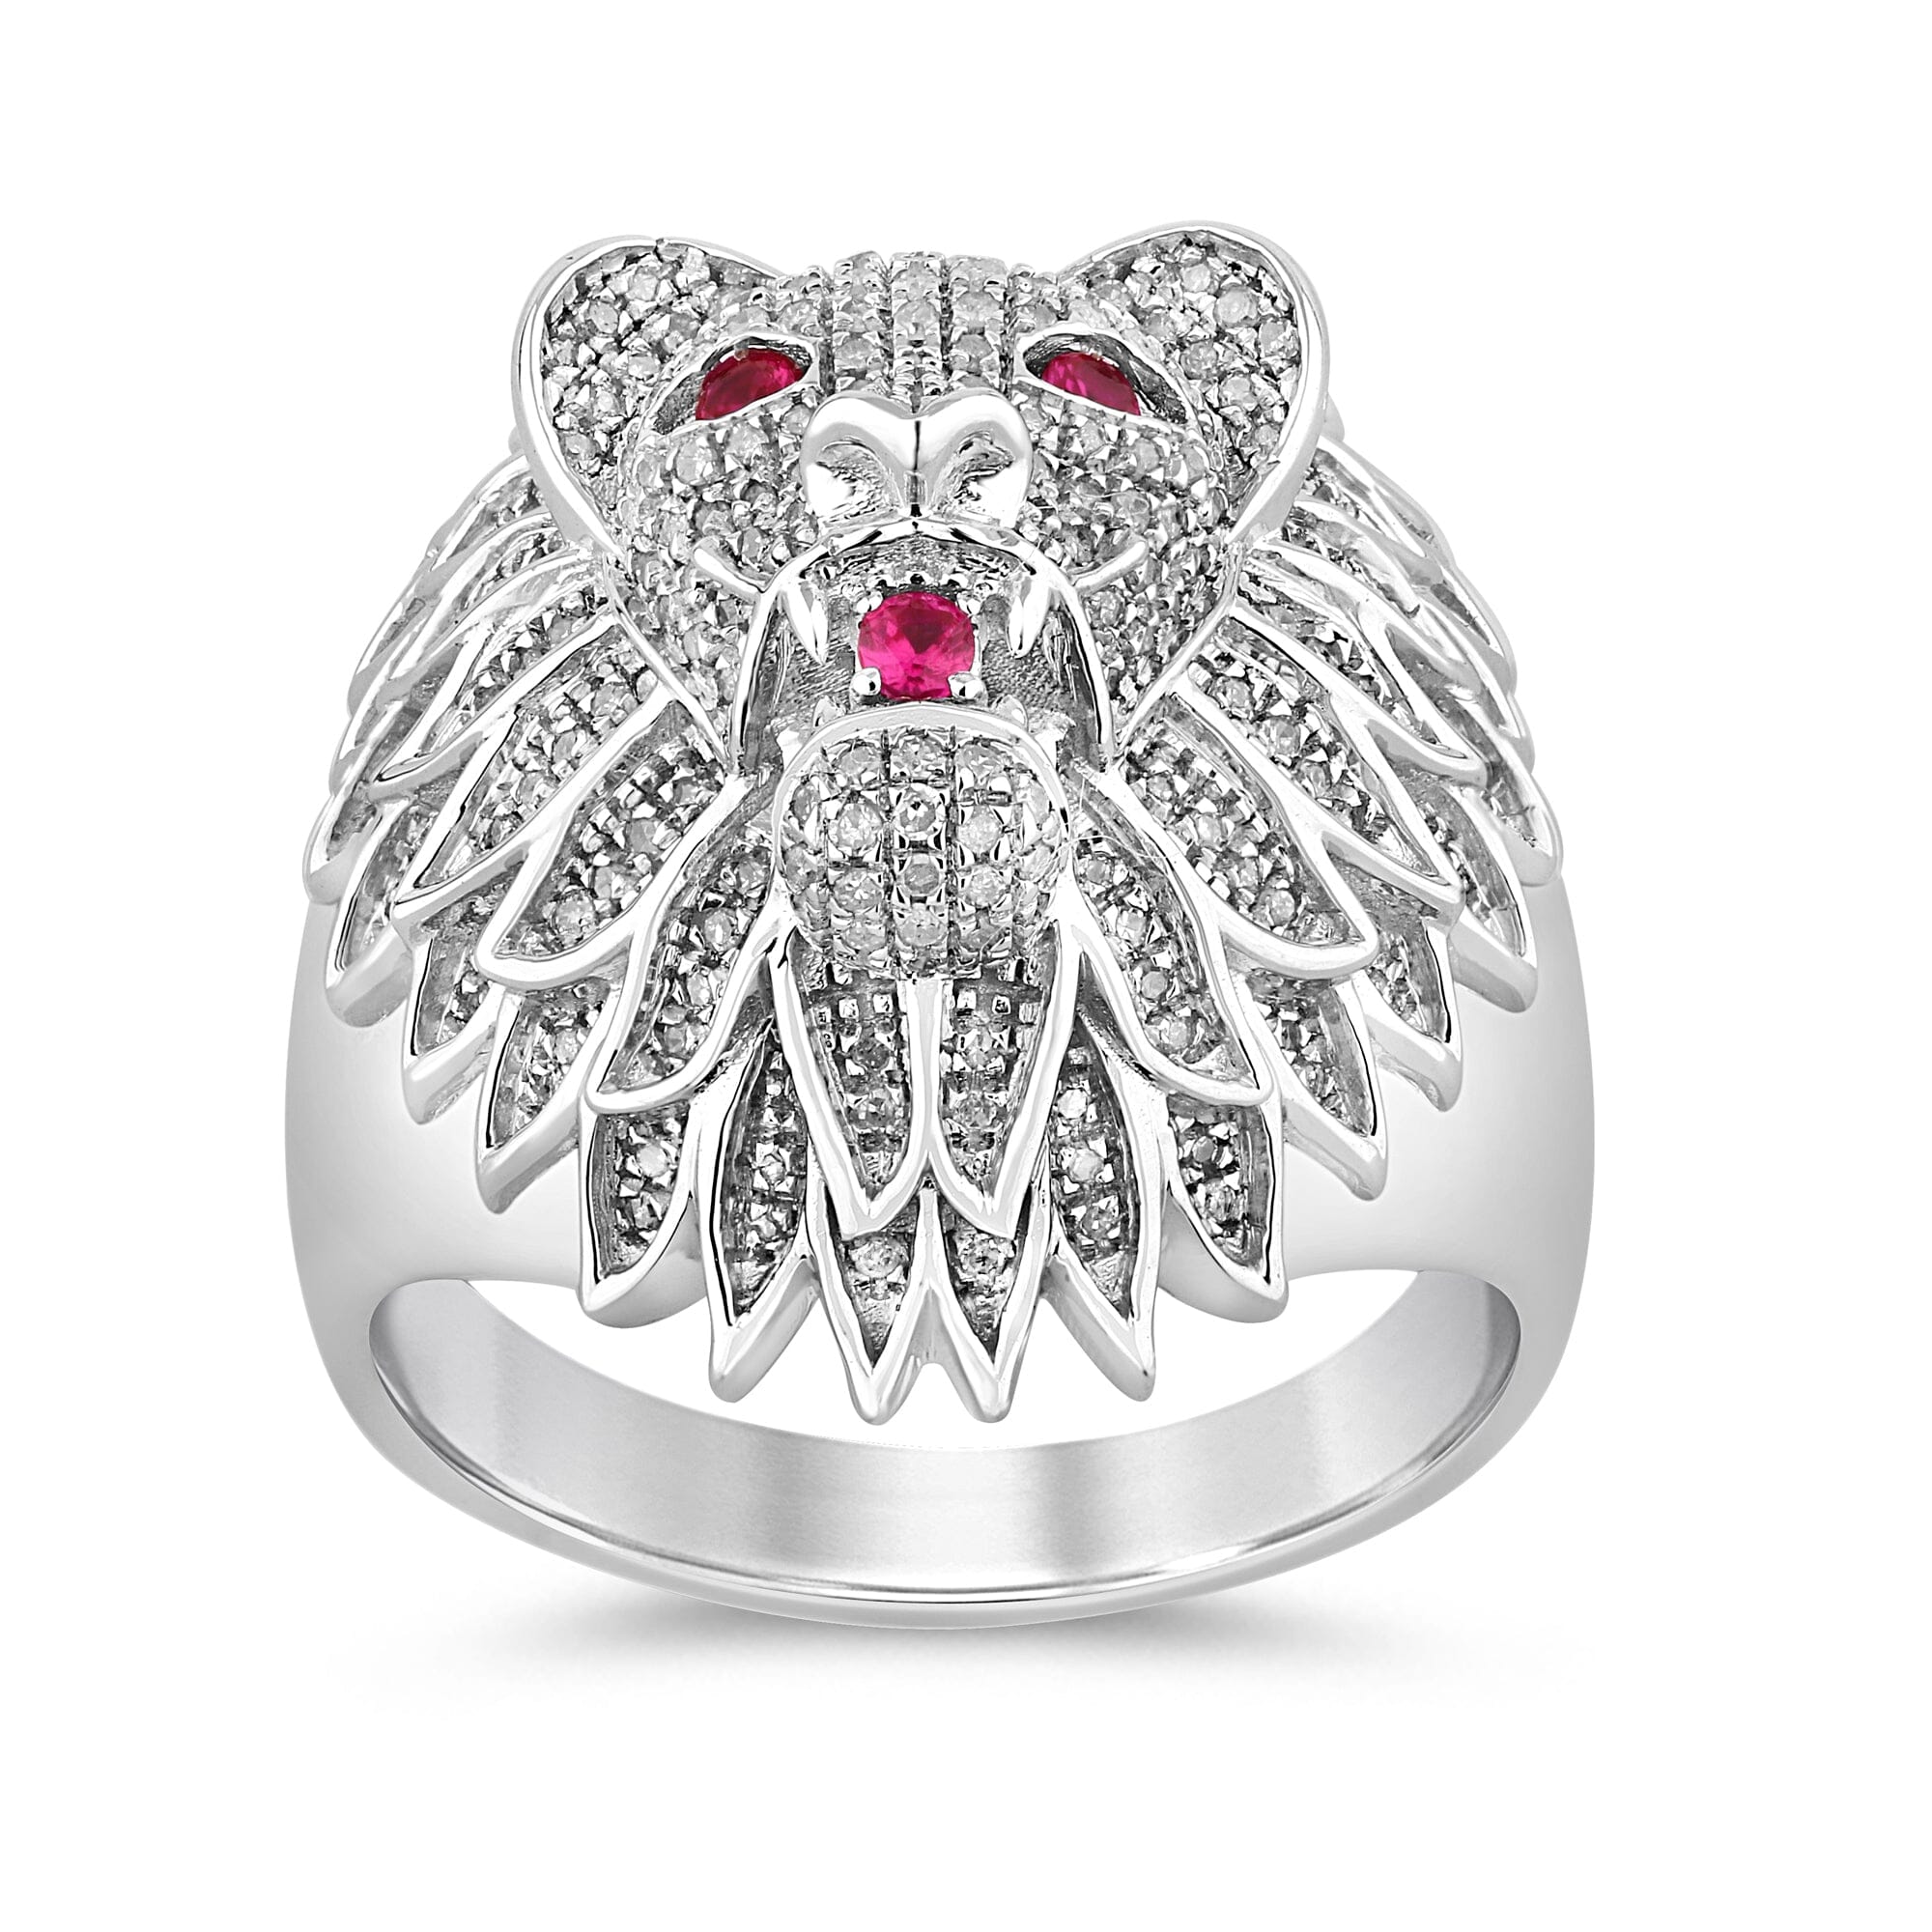 Stanton Made for Men Lion Head Ring with 0.60ct of Diamonds and Created Ruby in Sterling Silver Rings Bevilles 